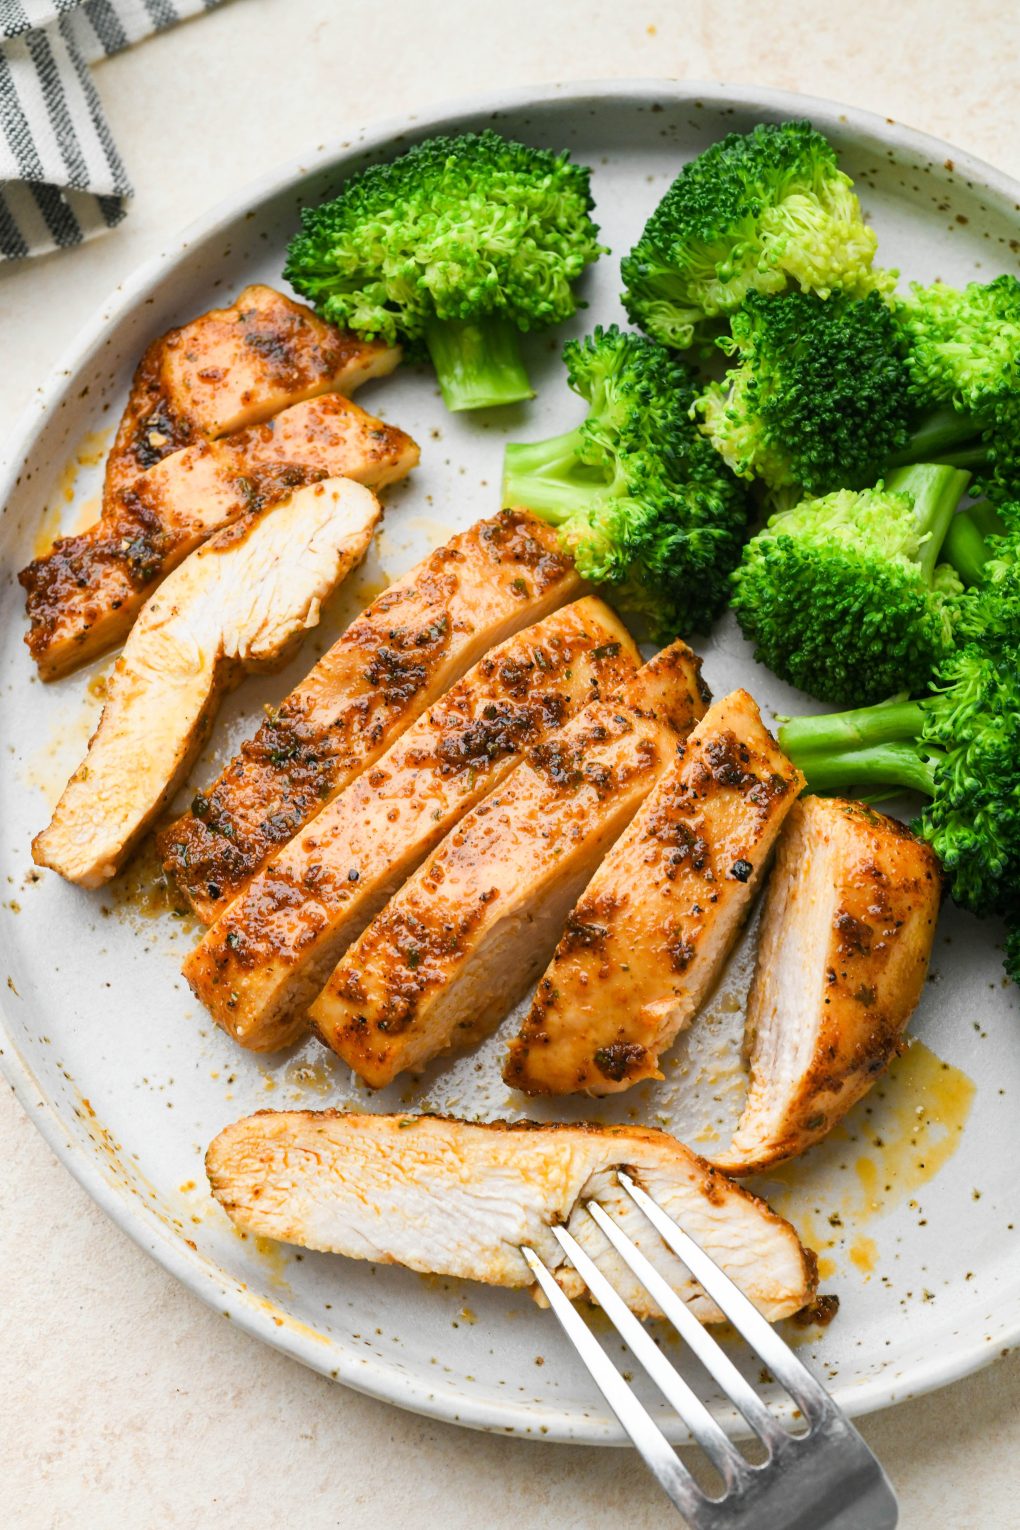 Baked chicken breast sliced on a light colored speckled plate, next to some steamed broccoli.